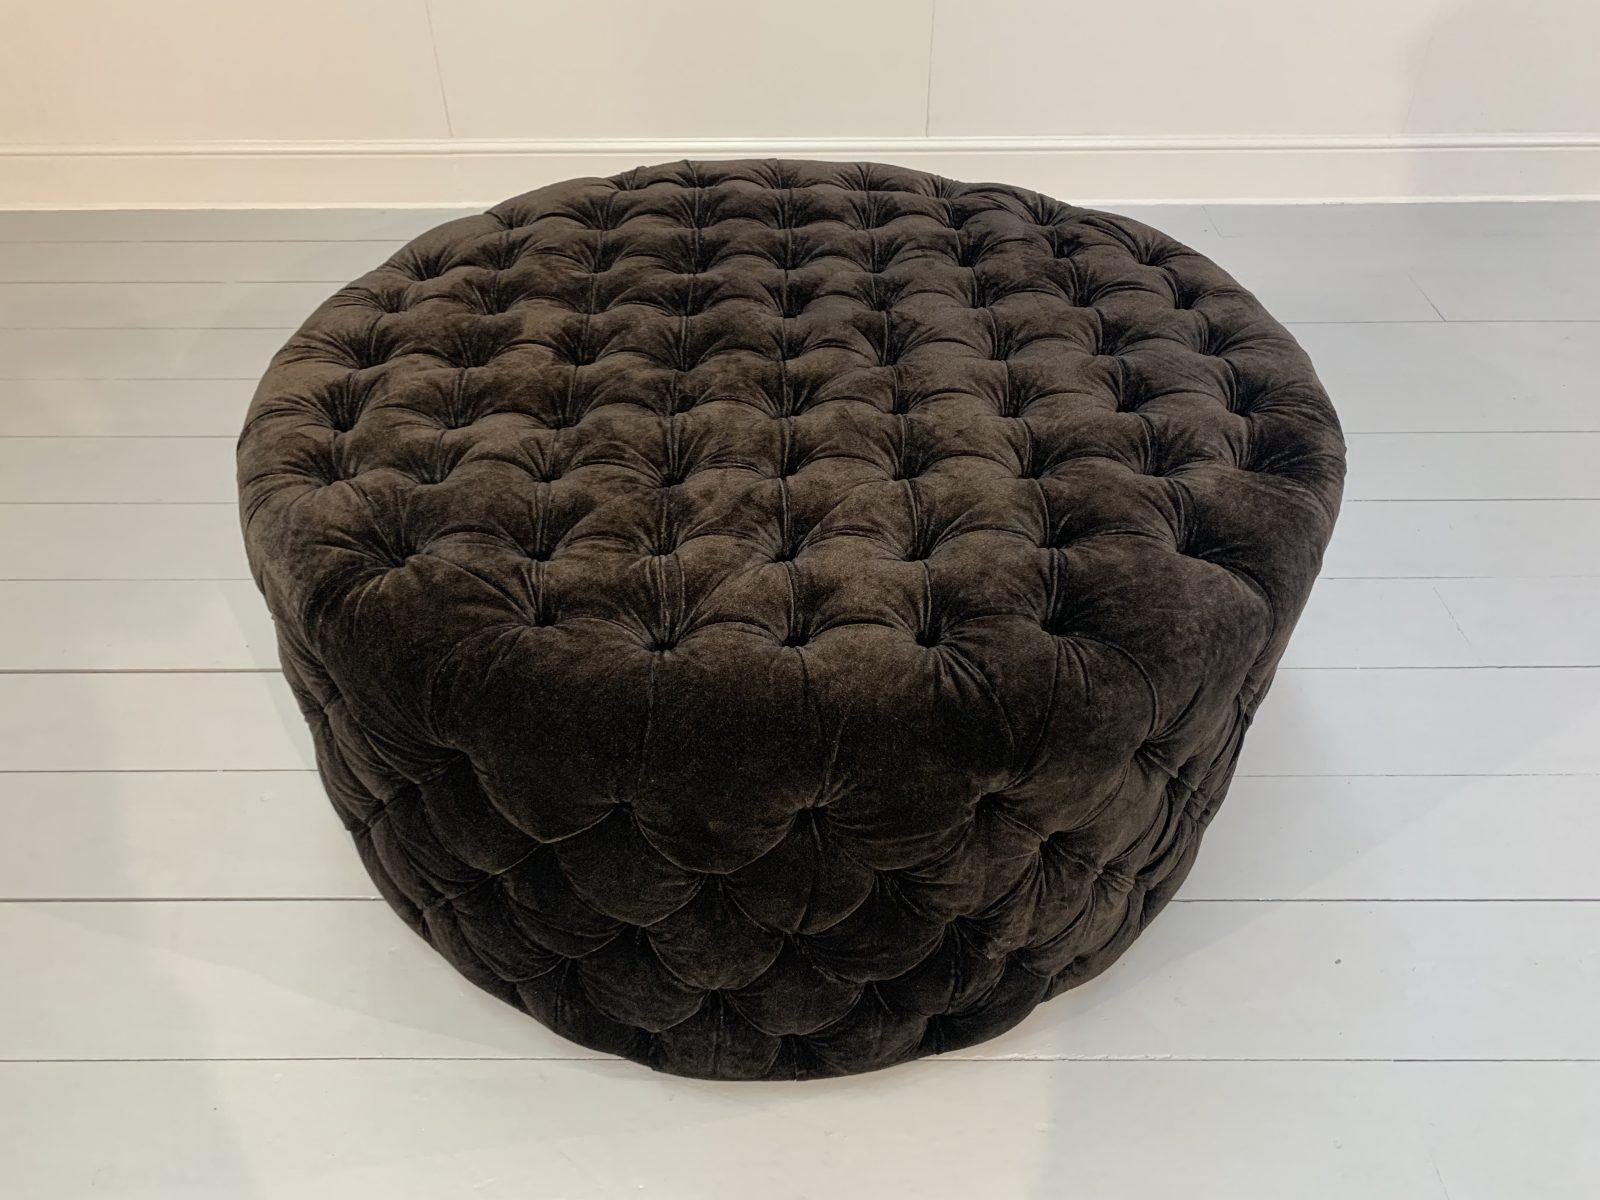 This is the most spectacular, unused Bespoke “Soho Buttoned-Drum” Ottoman/Footstool, dressed in a breathtaking, peerless, top-grade, Italian-Velvet Fabric in an elegant, flexible Dark-Grey.

In particular, this bespoke commission was created by a